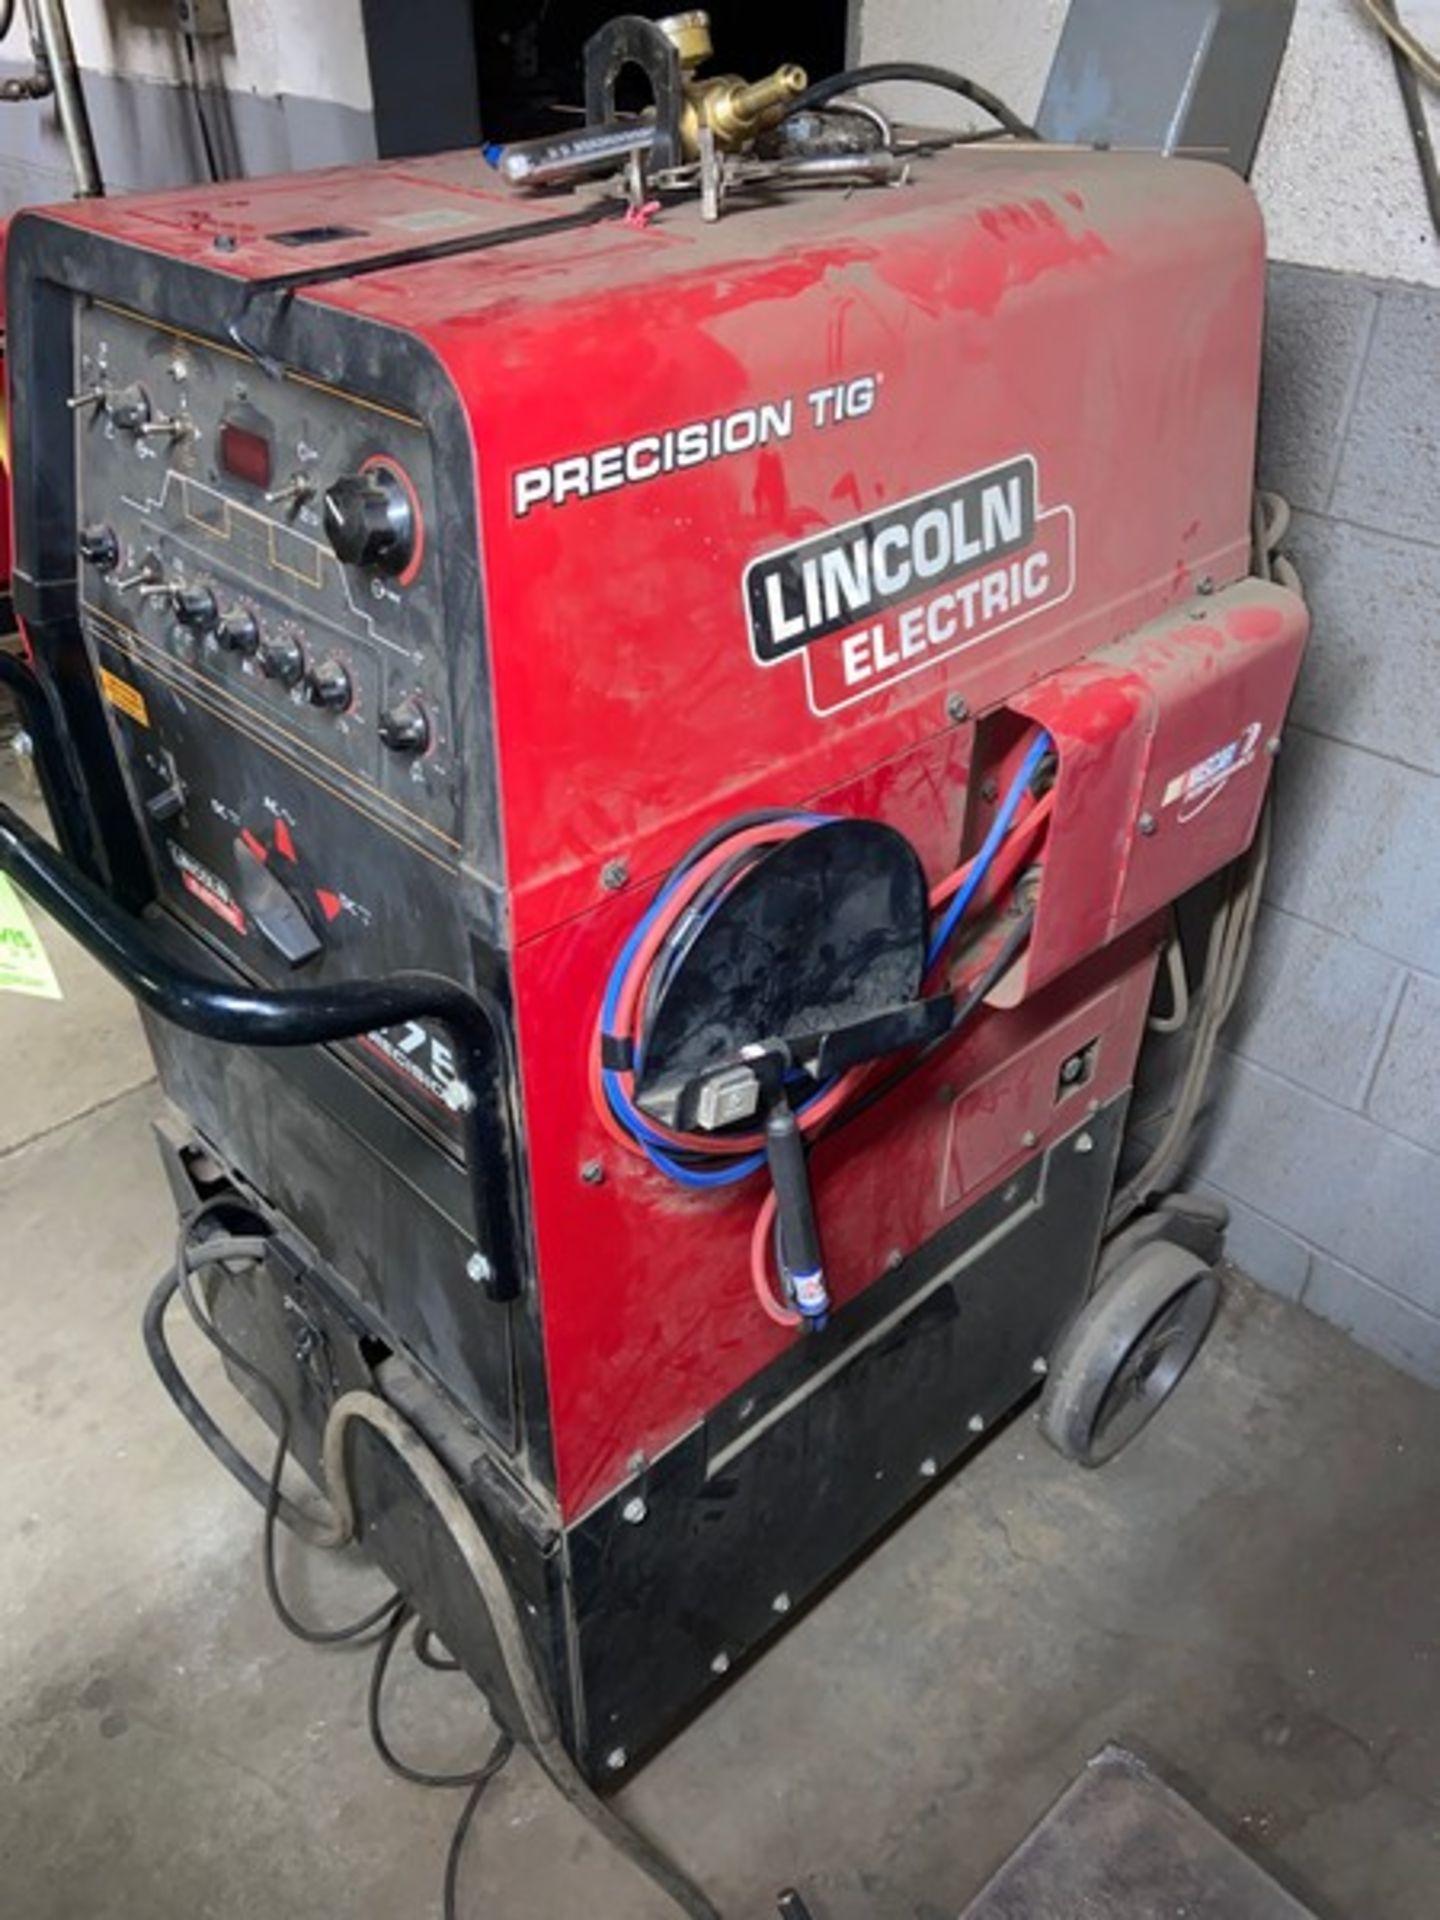 Lincoln Electric 375 Precision TIG Welder, S/N U1150204401, Mounted on Portable Frame - Image 3 of 6